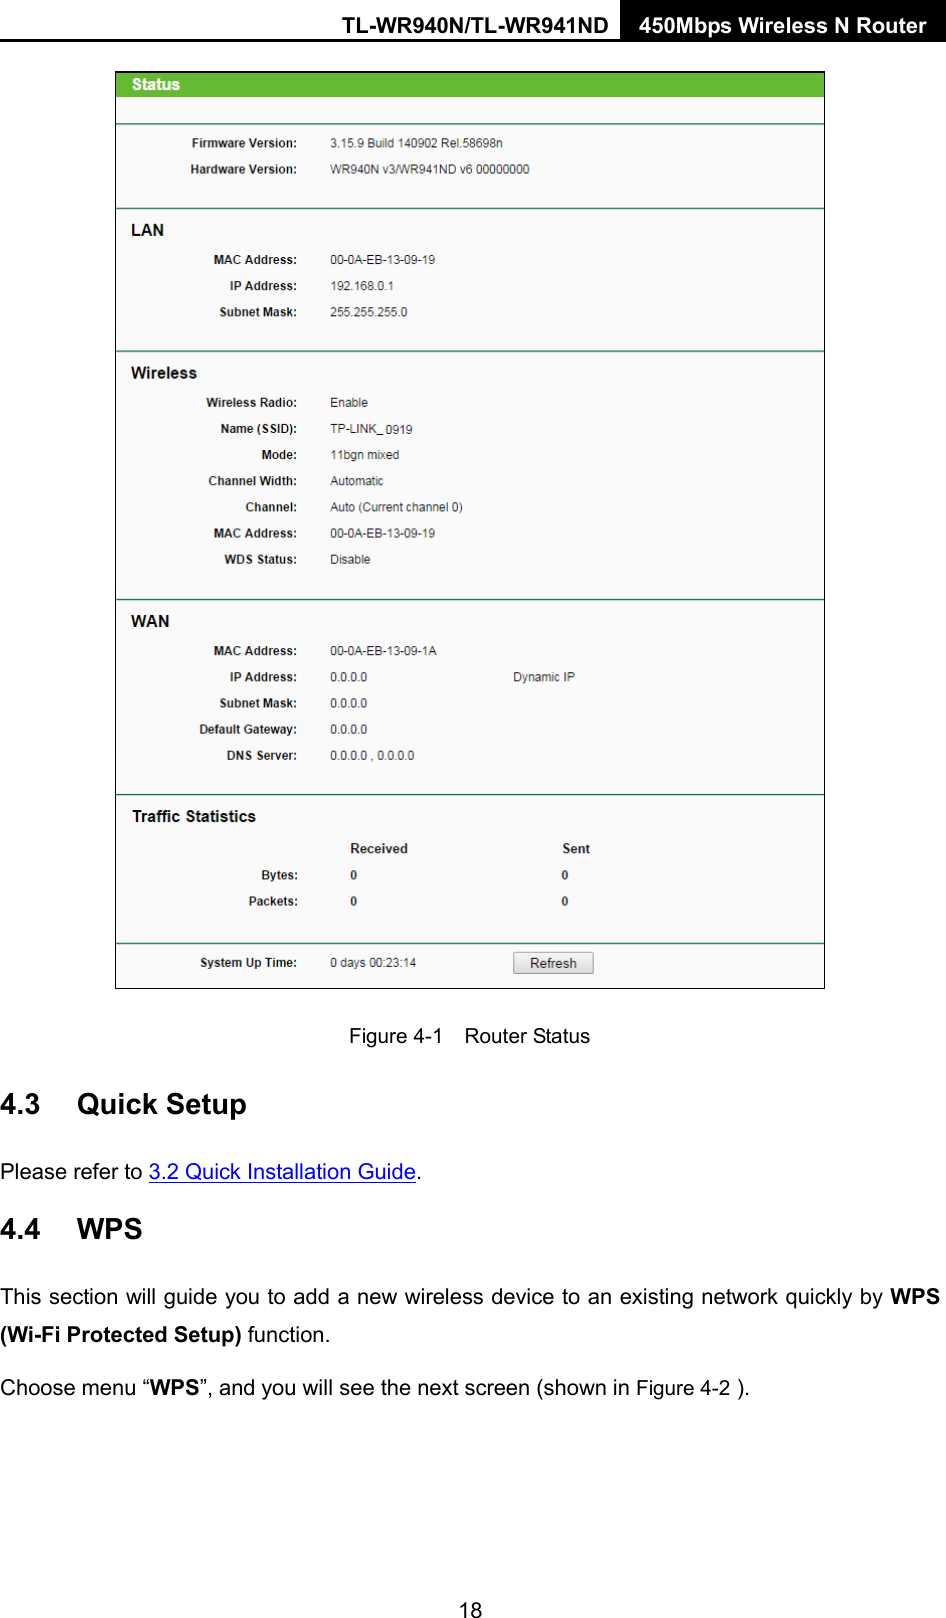 TL-WR940N/TL-WR941ND 450Mbps Wireless N Router   Figure 4-1  Router Status 4.3 Quick Setup Please refer to 3.2 Quick Installation Guide. 4.4 WPS This section will guide you to add a new wireless device to an existing network quickly by WPS (Wi-Fi Protected Setup) function.   Choose menu “WPS”, and you will see the next screen (shown in Figure 4-2 ). 18 